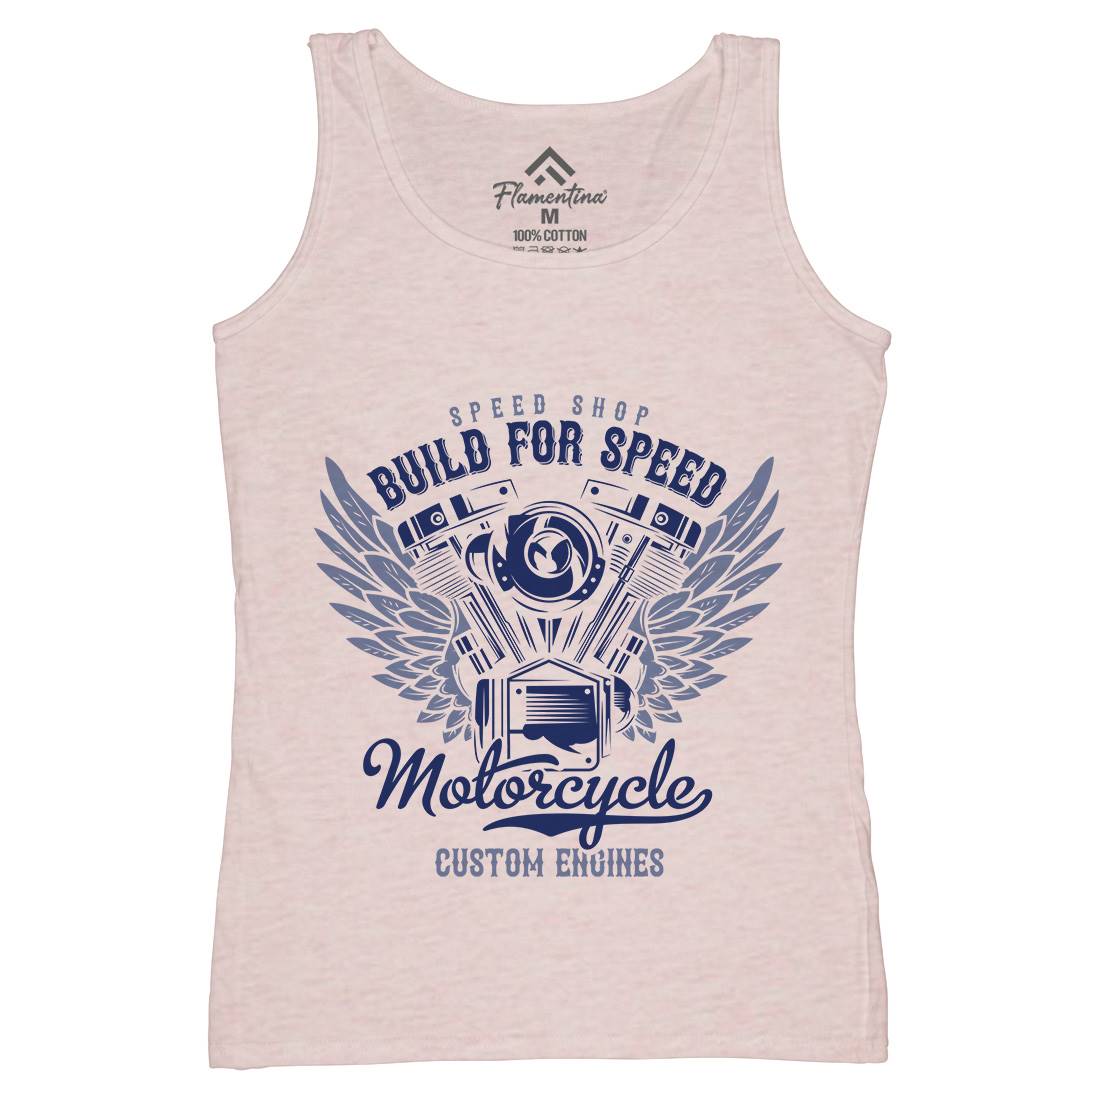 Build For Speed Womens Organic Tank Top Vest Motorcycles B842